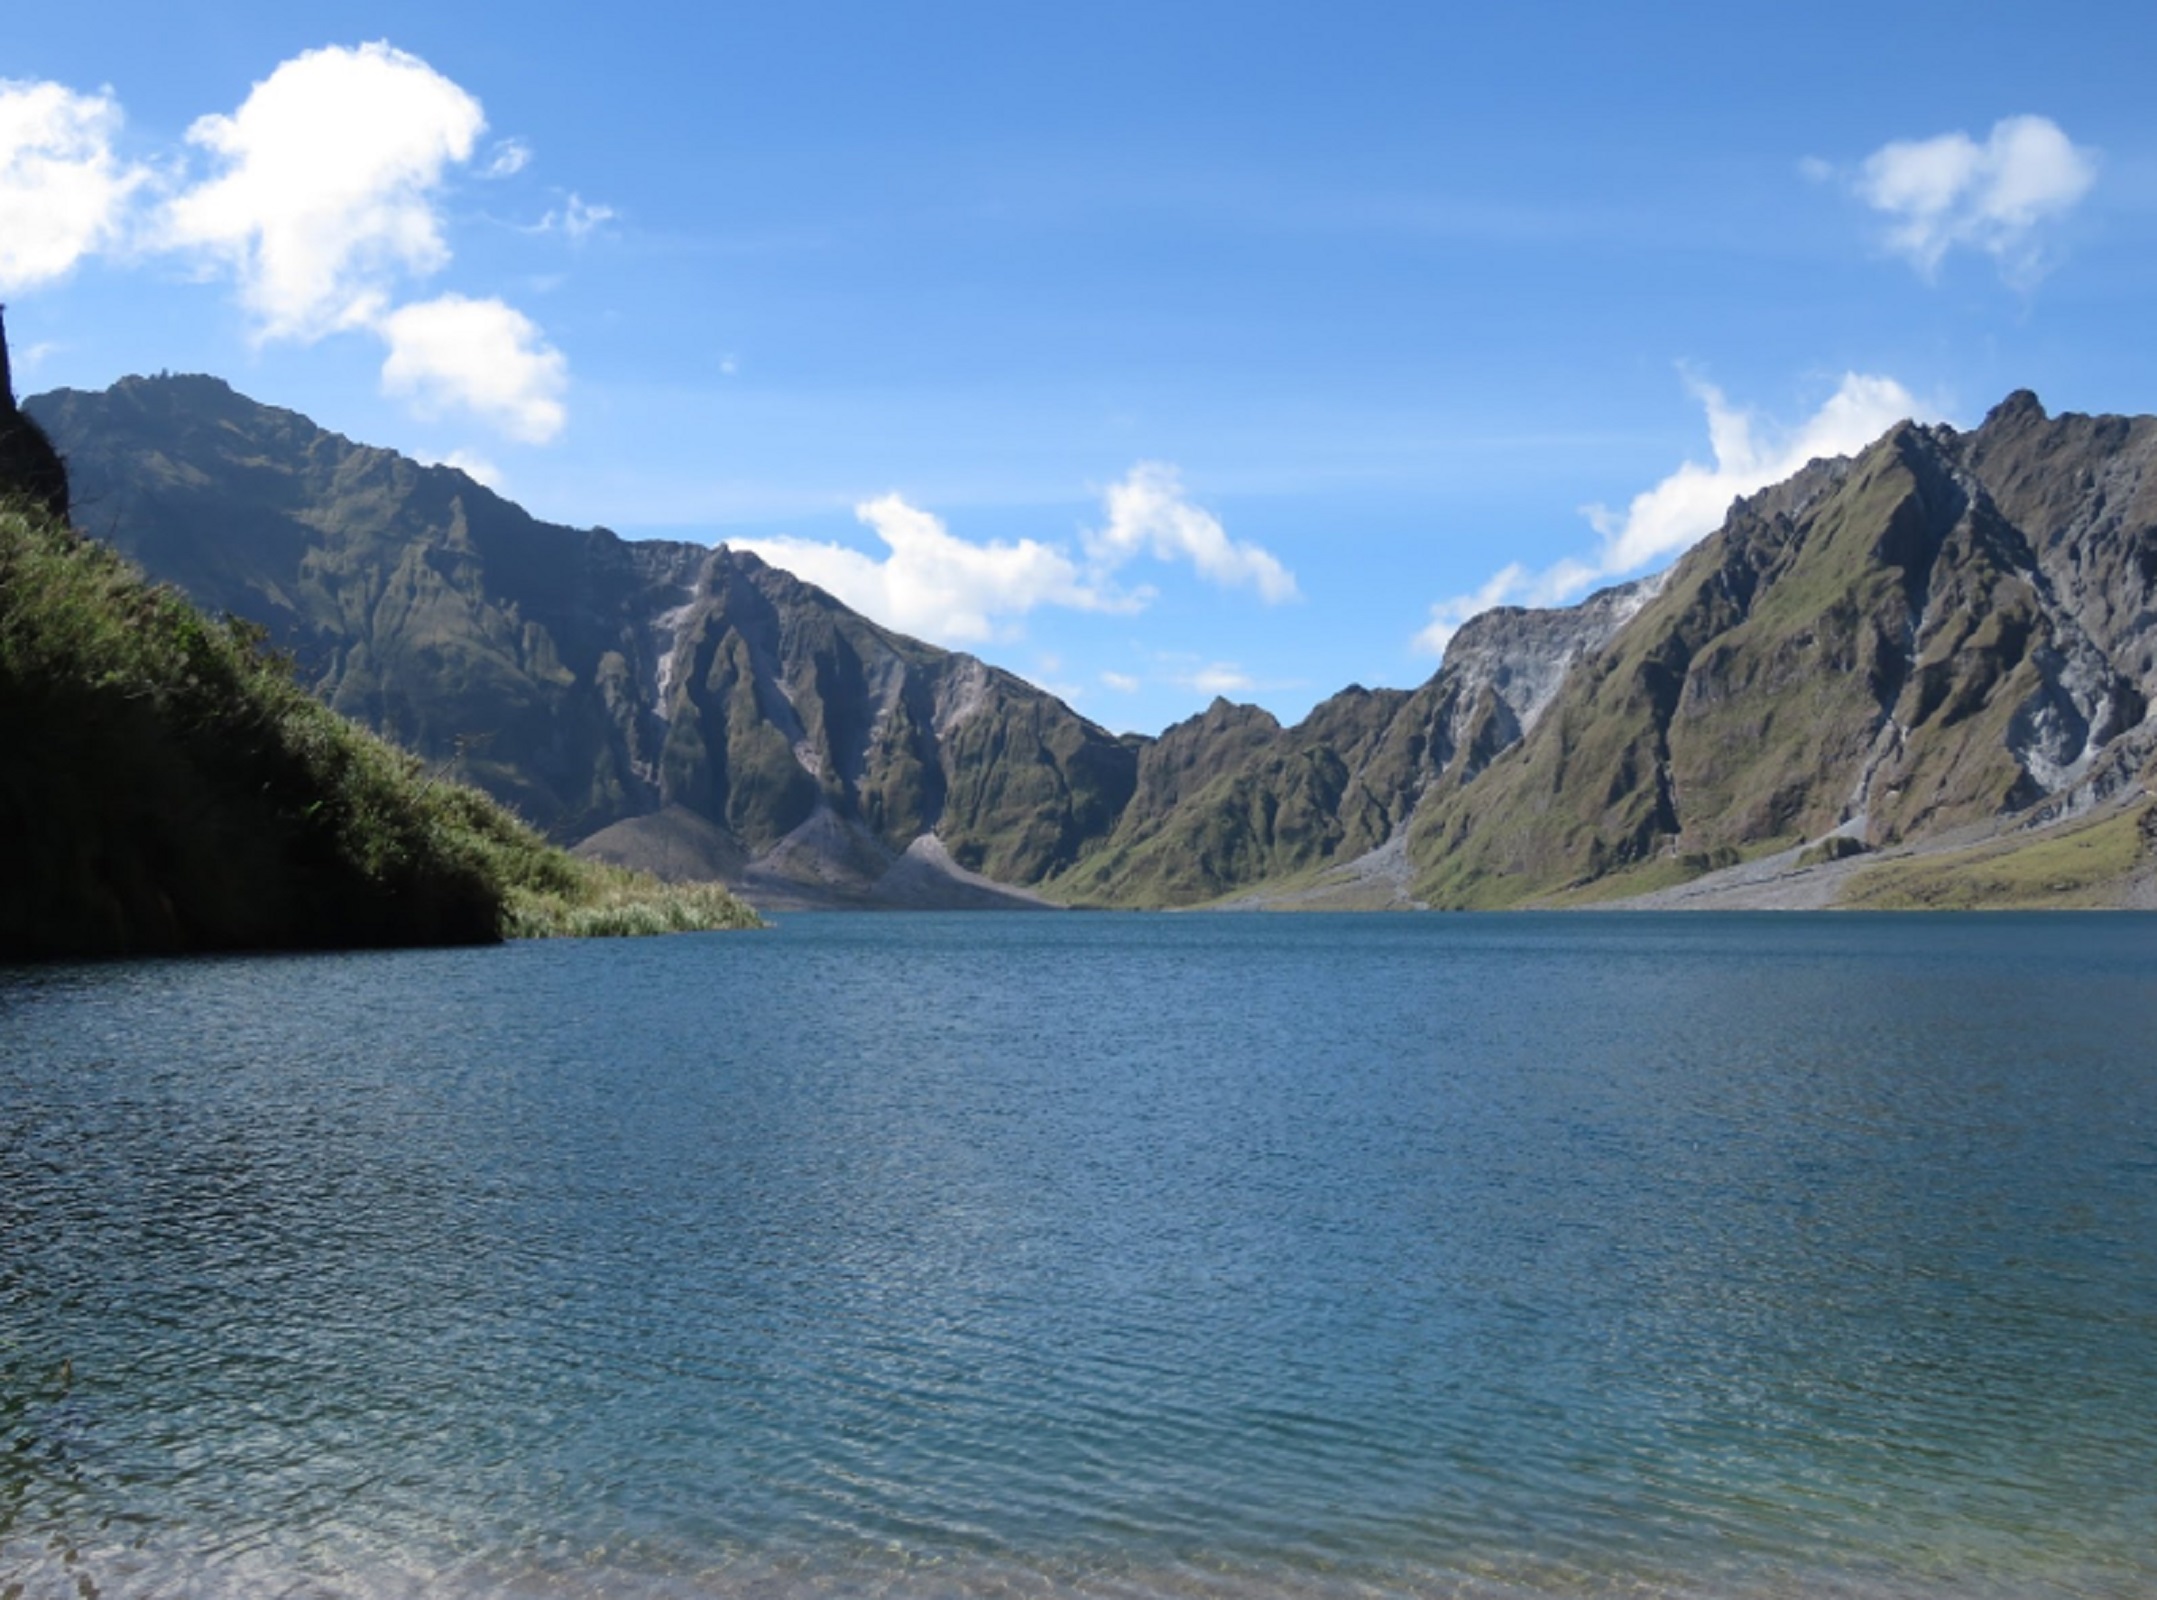 Guided Full Day Hike To Mt Pinatubo Crater Lake With 4x4 7025